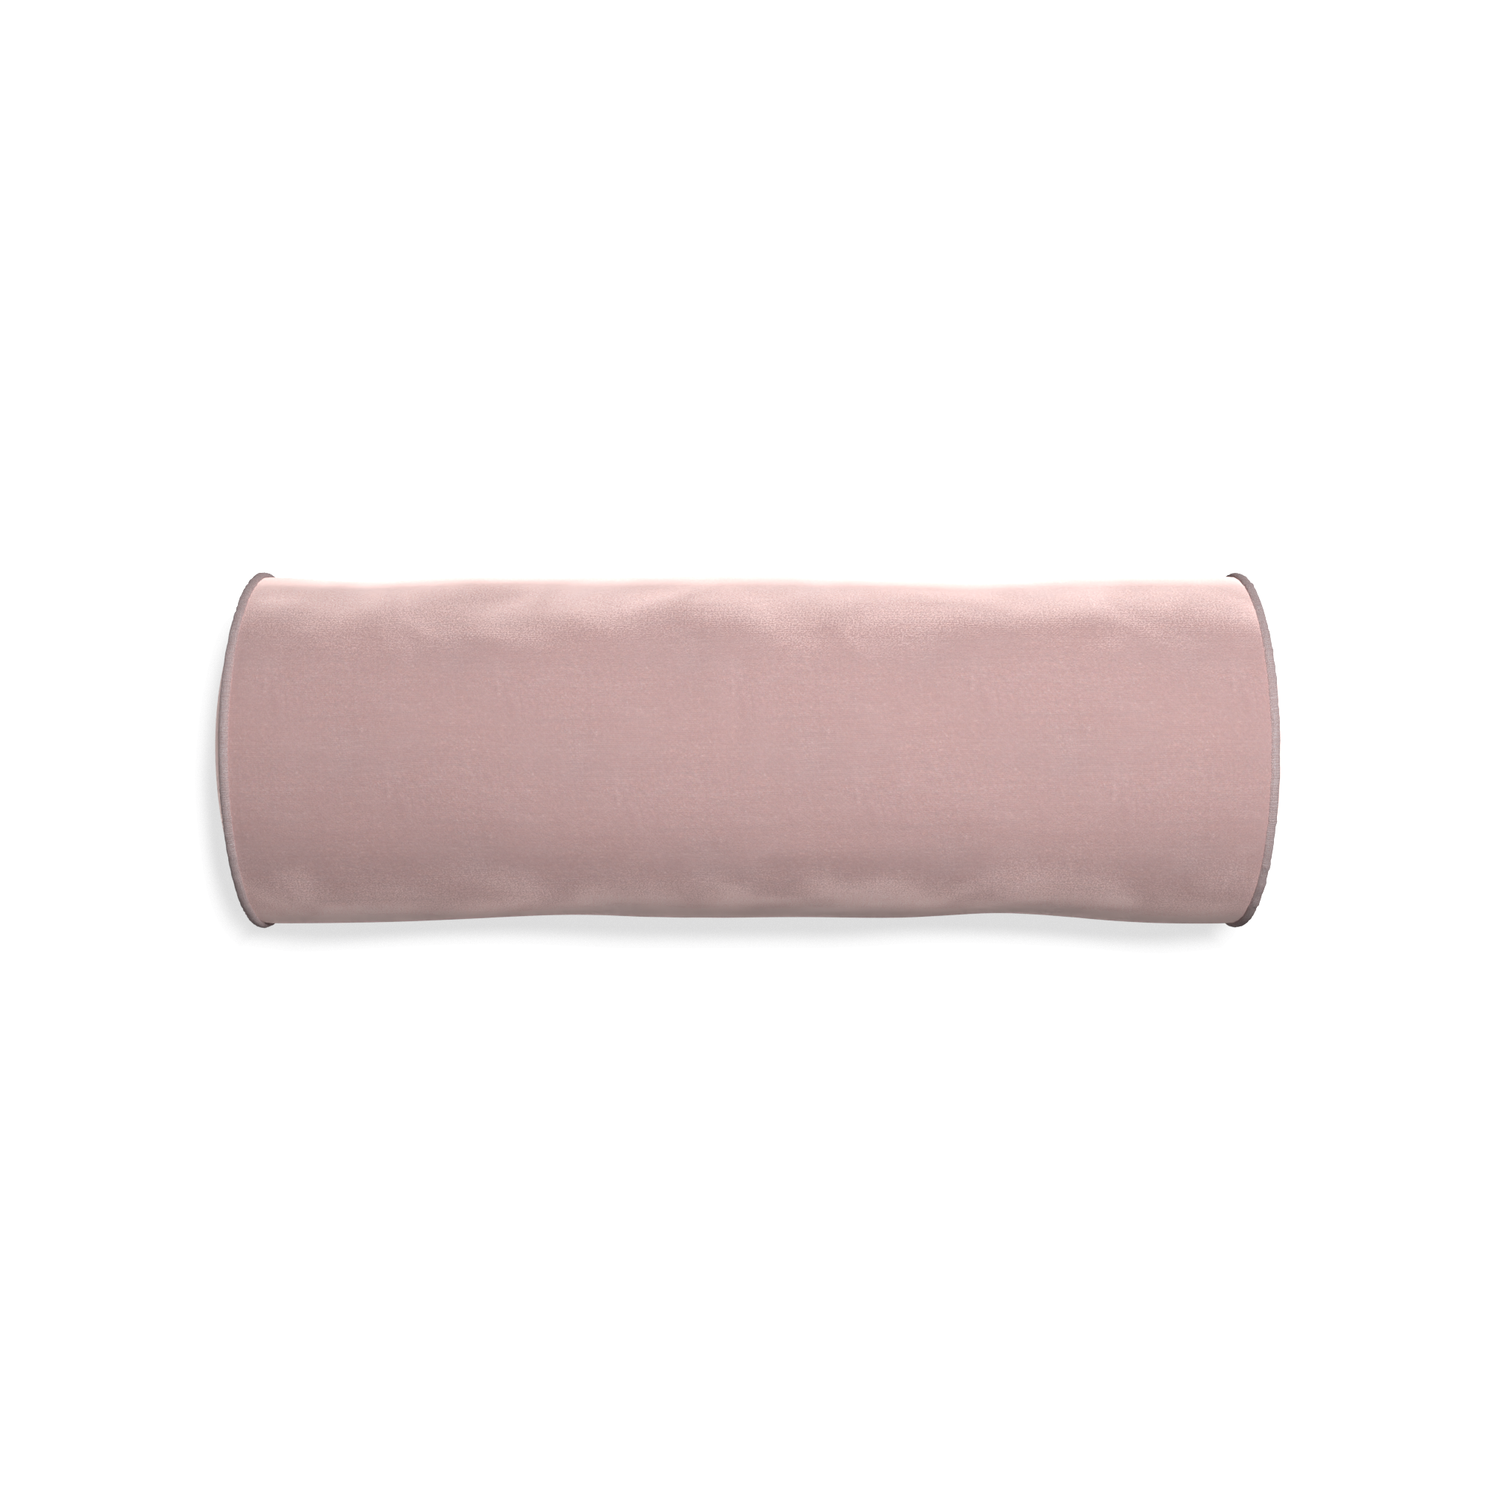 Bolster mauve velvet custom mauvepillow with orchid piping on white background